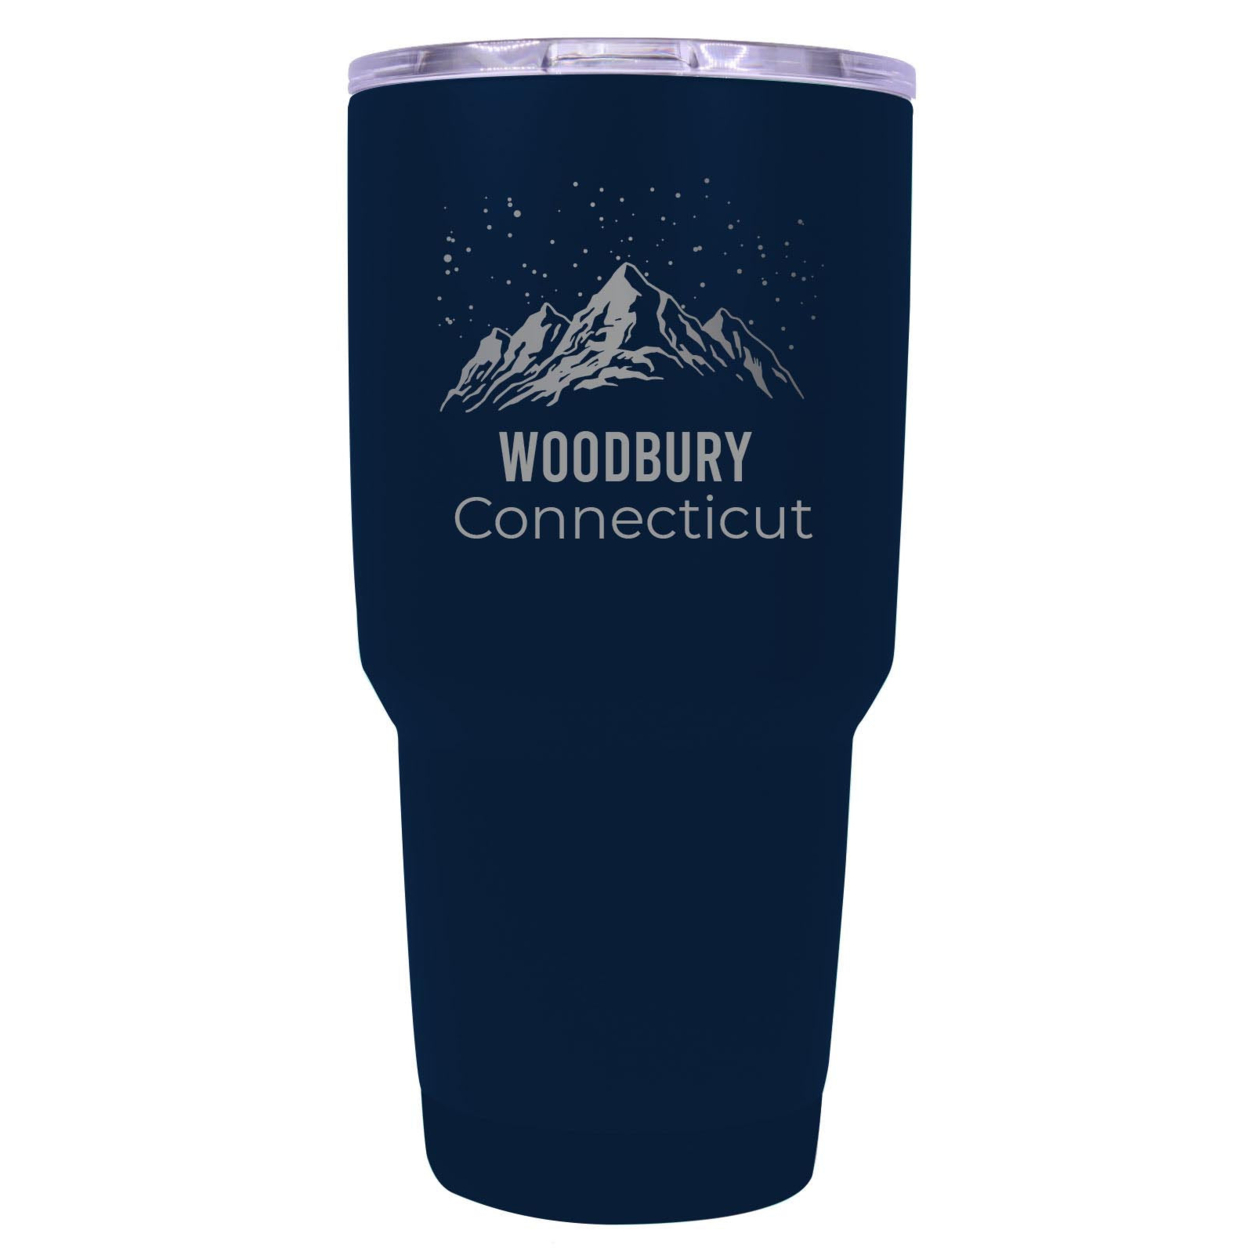 Woodbury Connecticut Ski Snowboard Winter Souvenir Laser Engraved 24 Oz Insulated Stainless Steel Tumbler - Navy